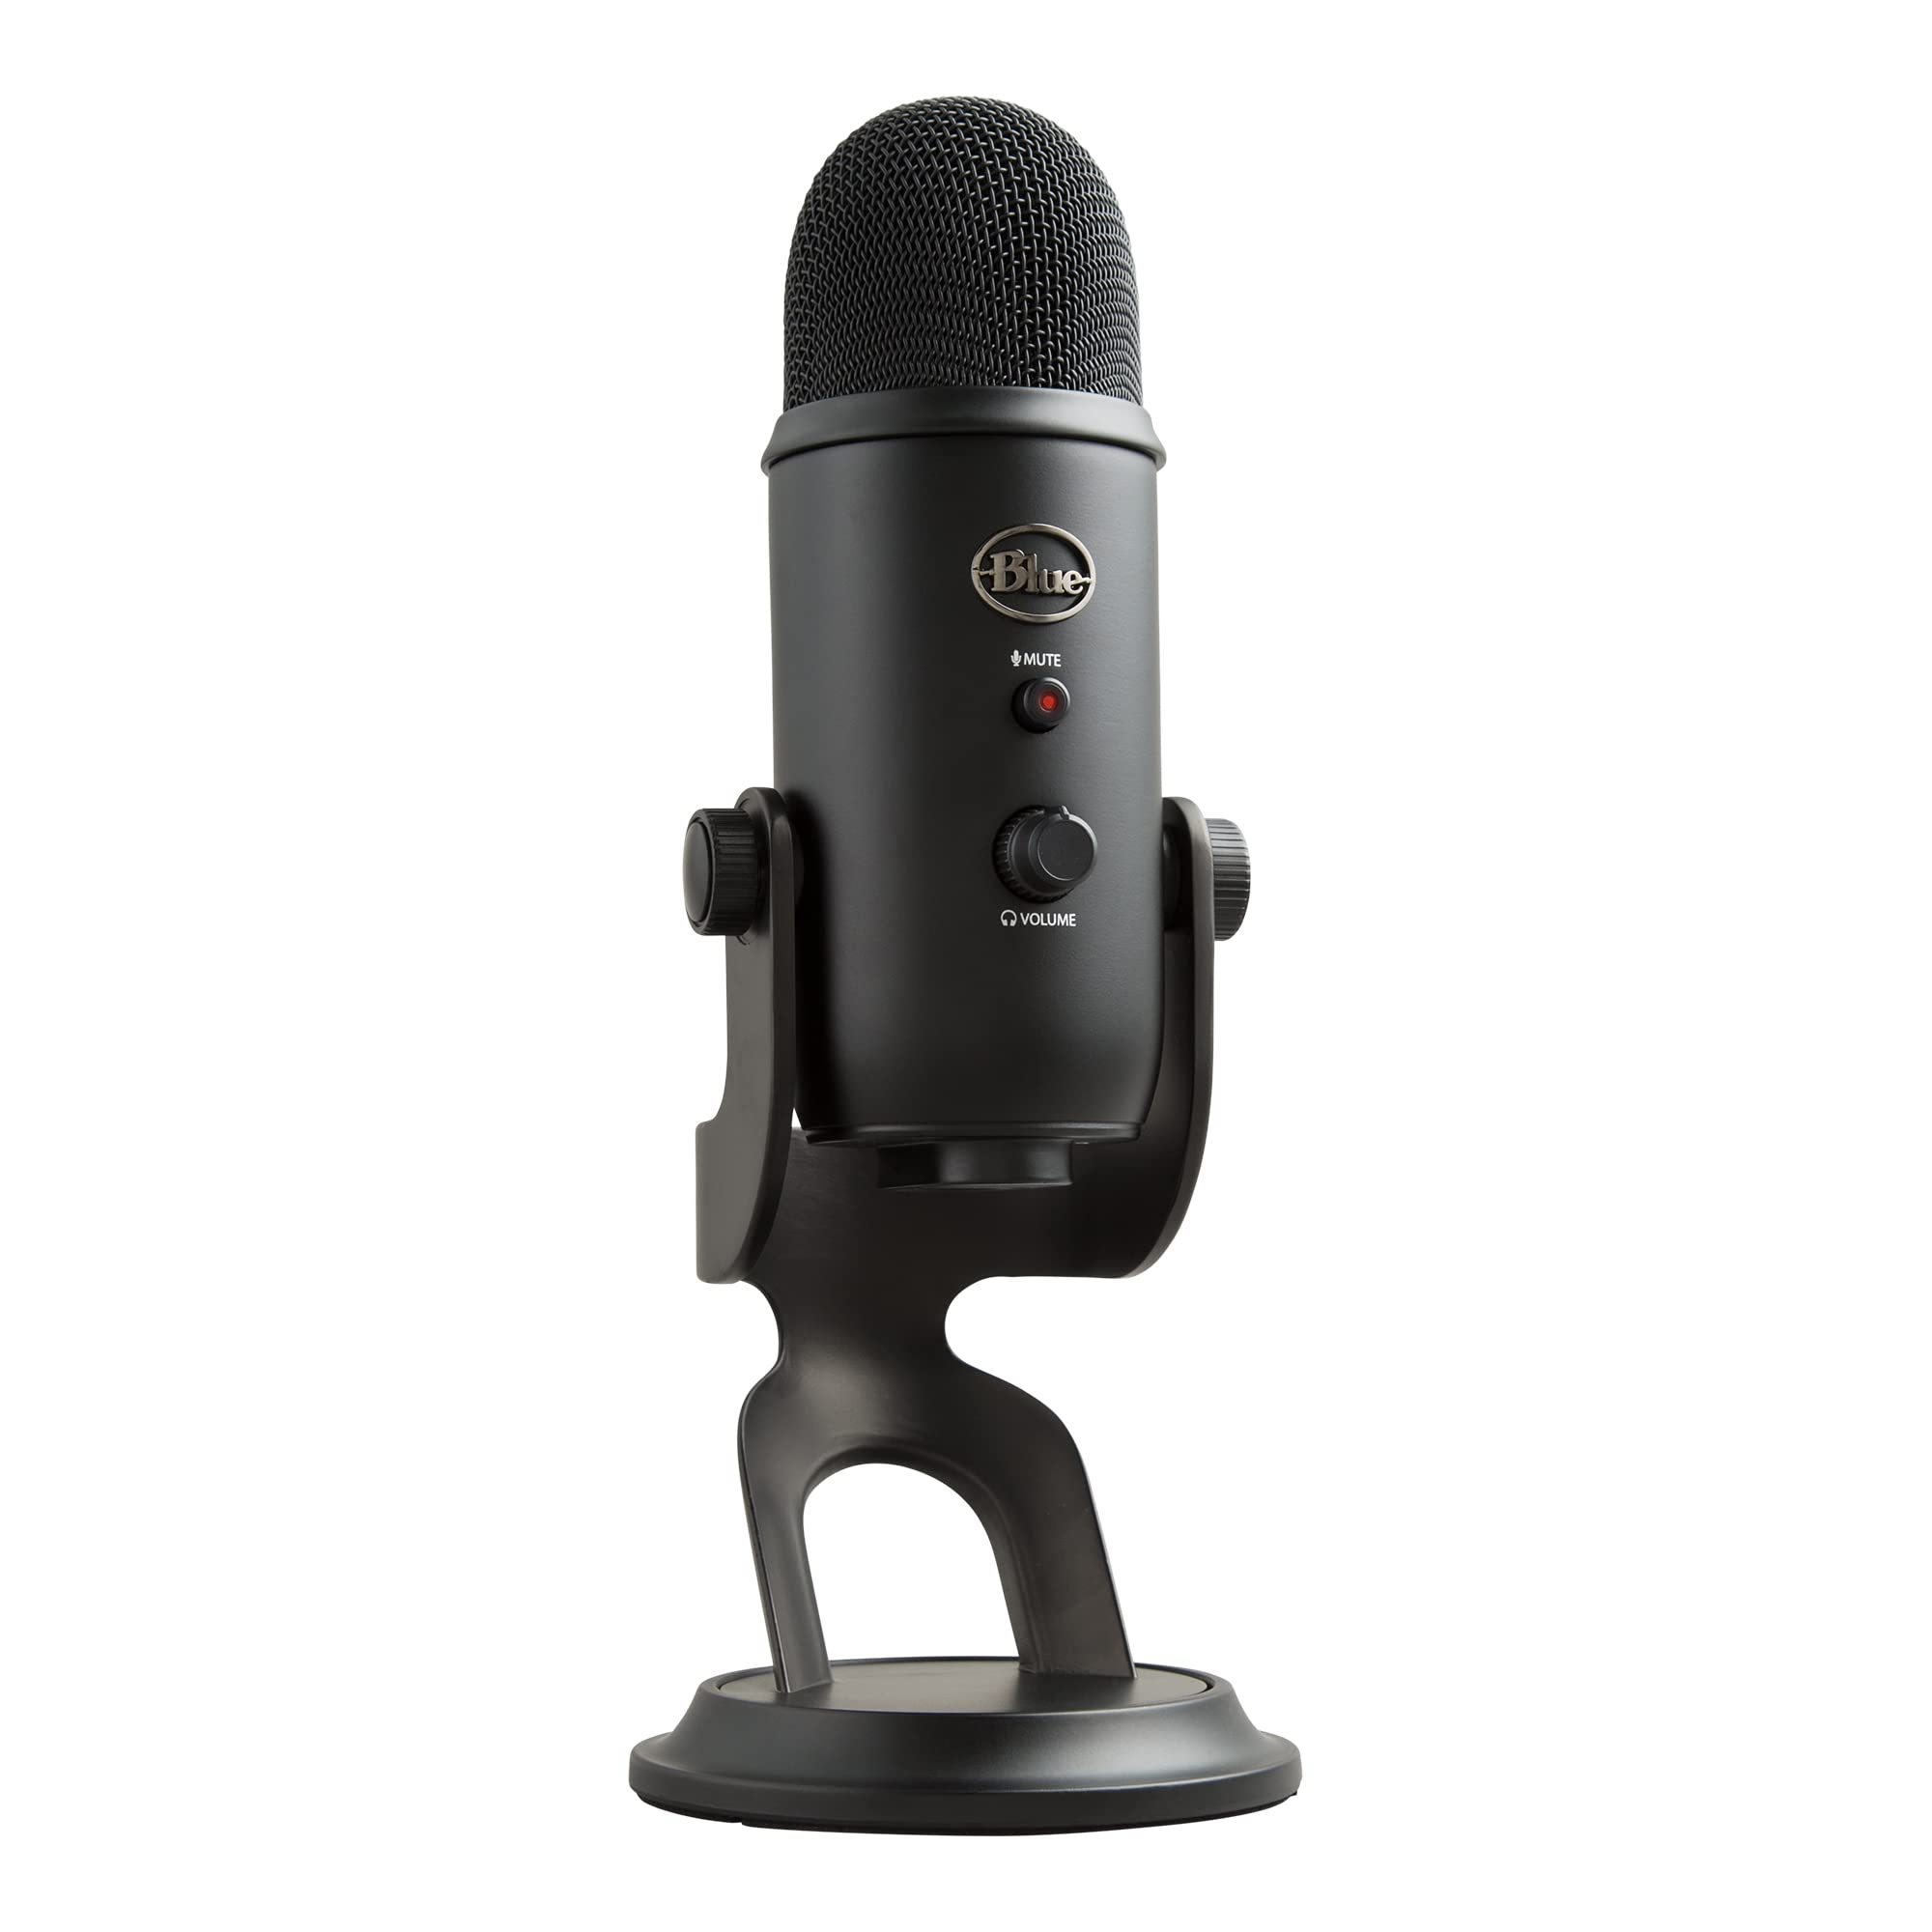 Image showing the Blue Jeti Microphone